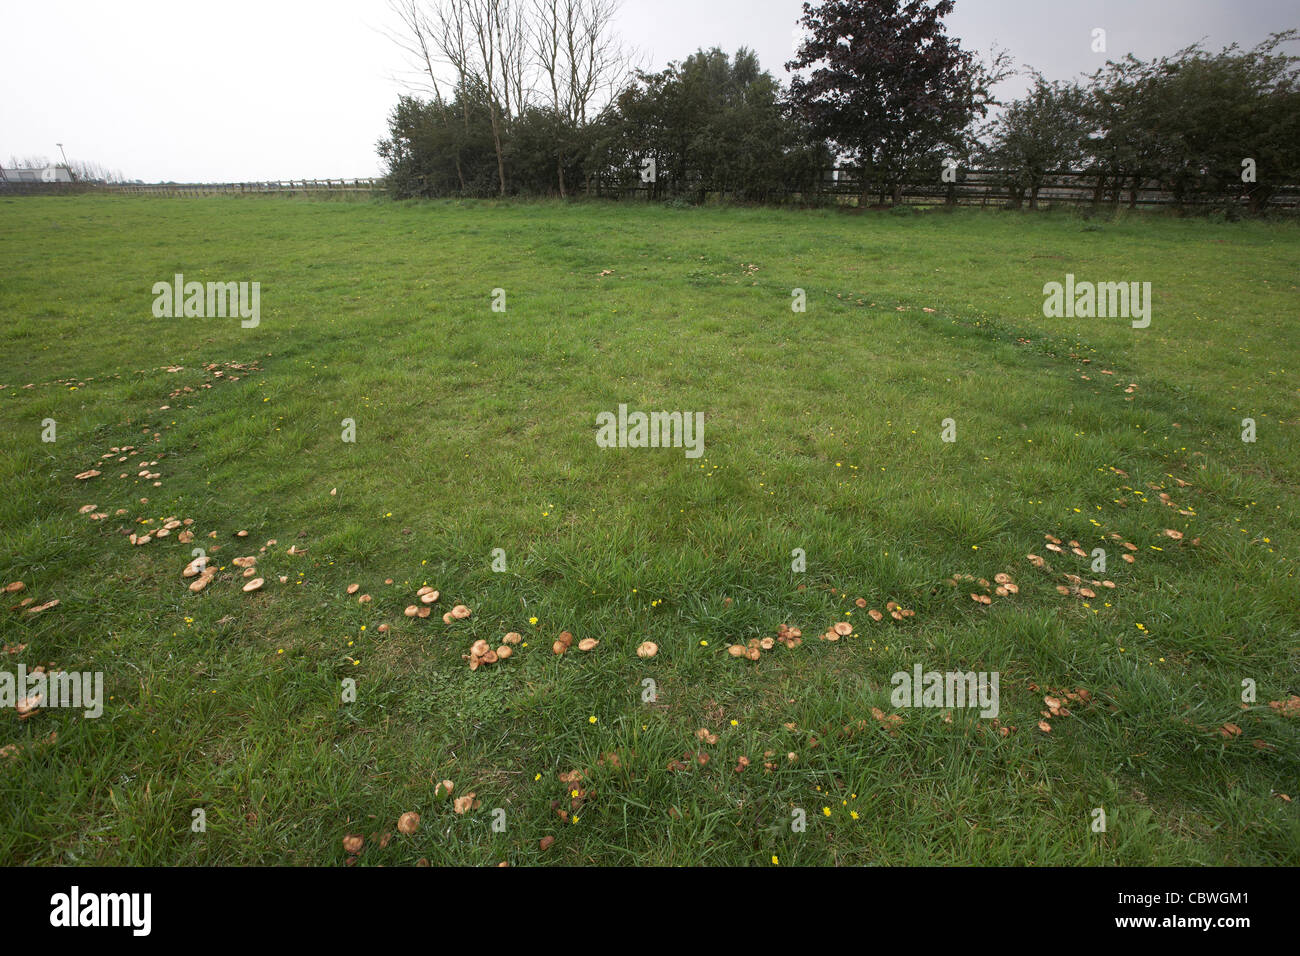 Fairy ring of mushrooms in a meadow, UK, growing in a circle Stock Photo